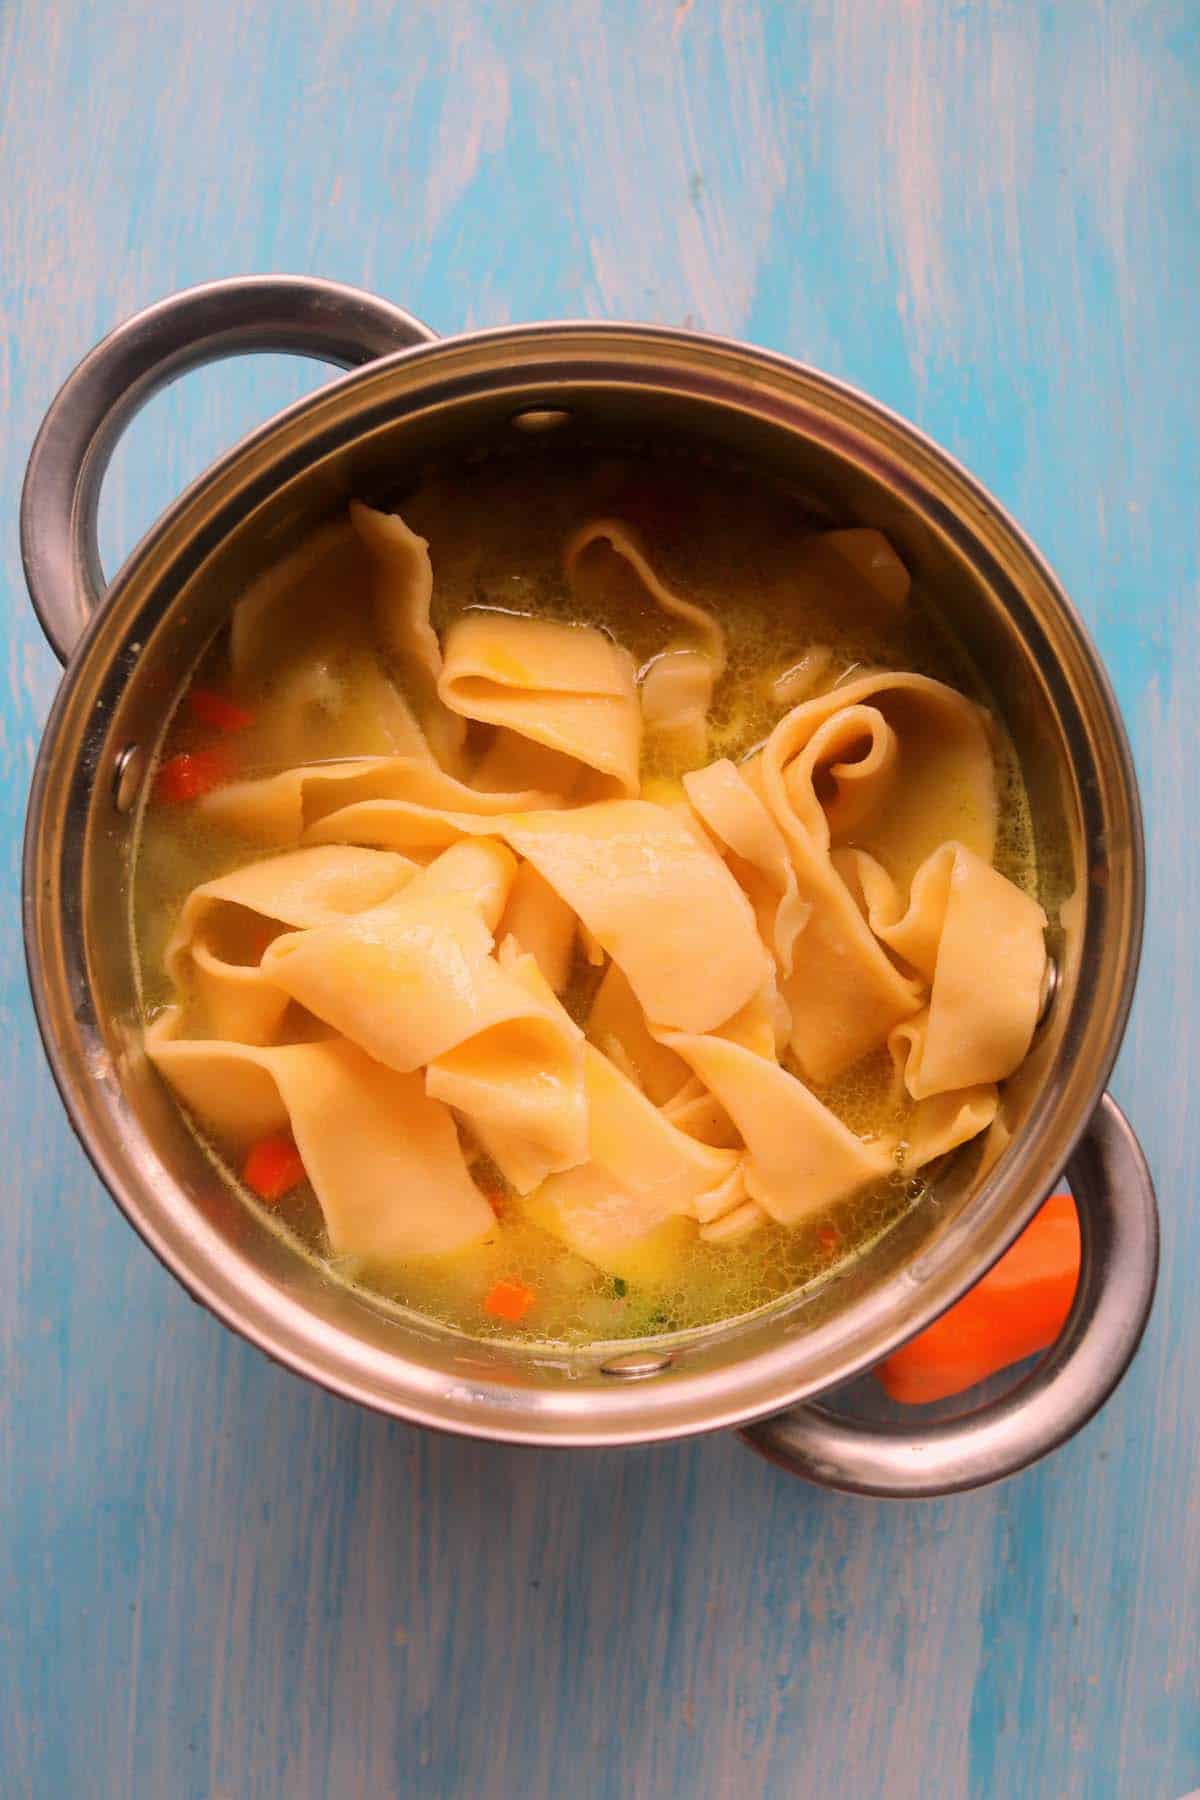 Egg noodles in the pot of chicken soup.